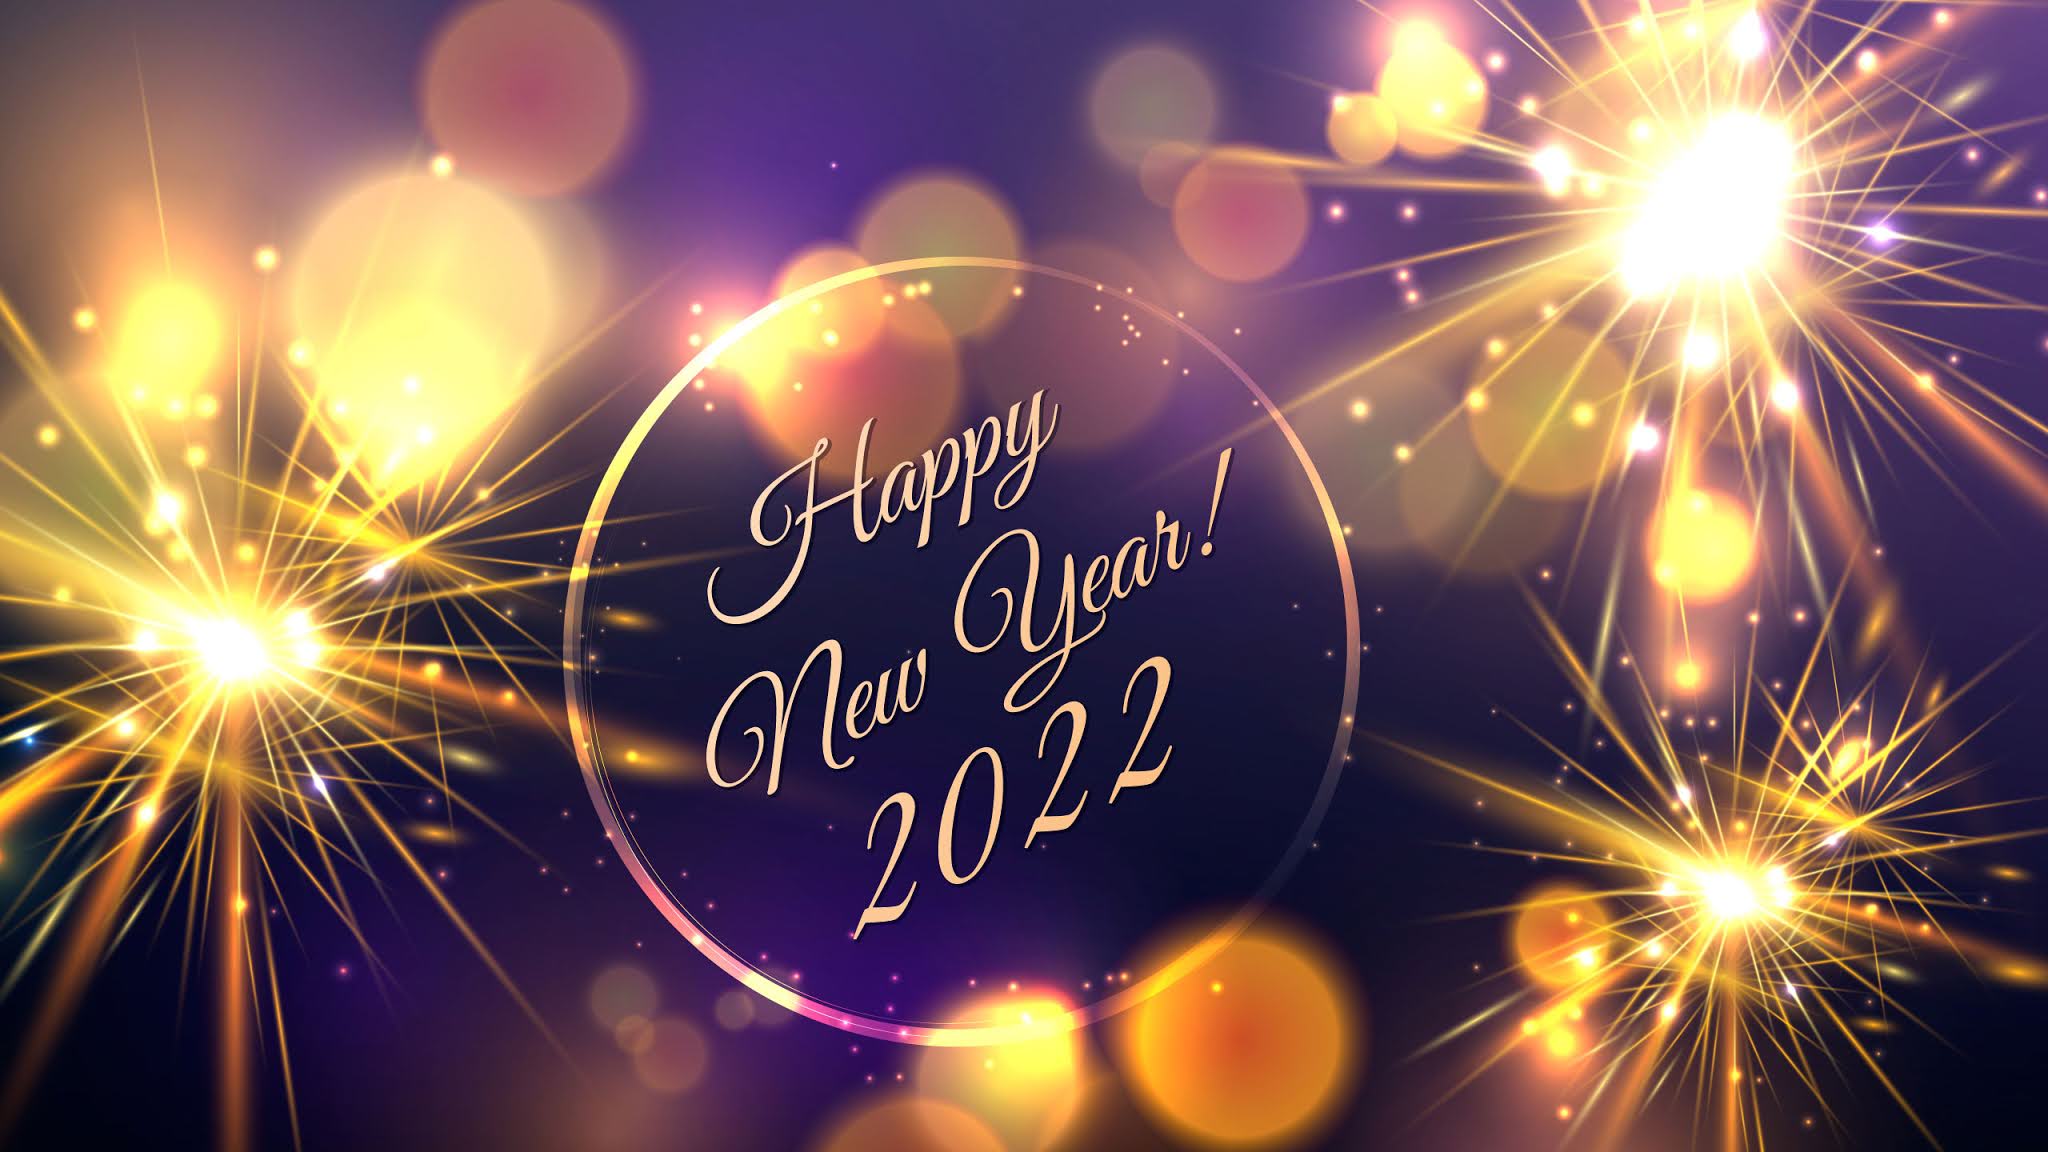 2022 New Year Wallpapers